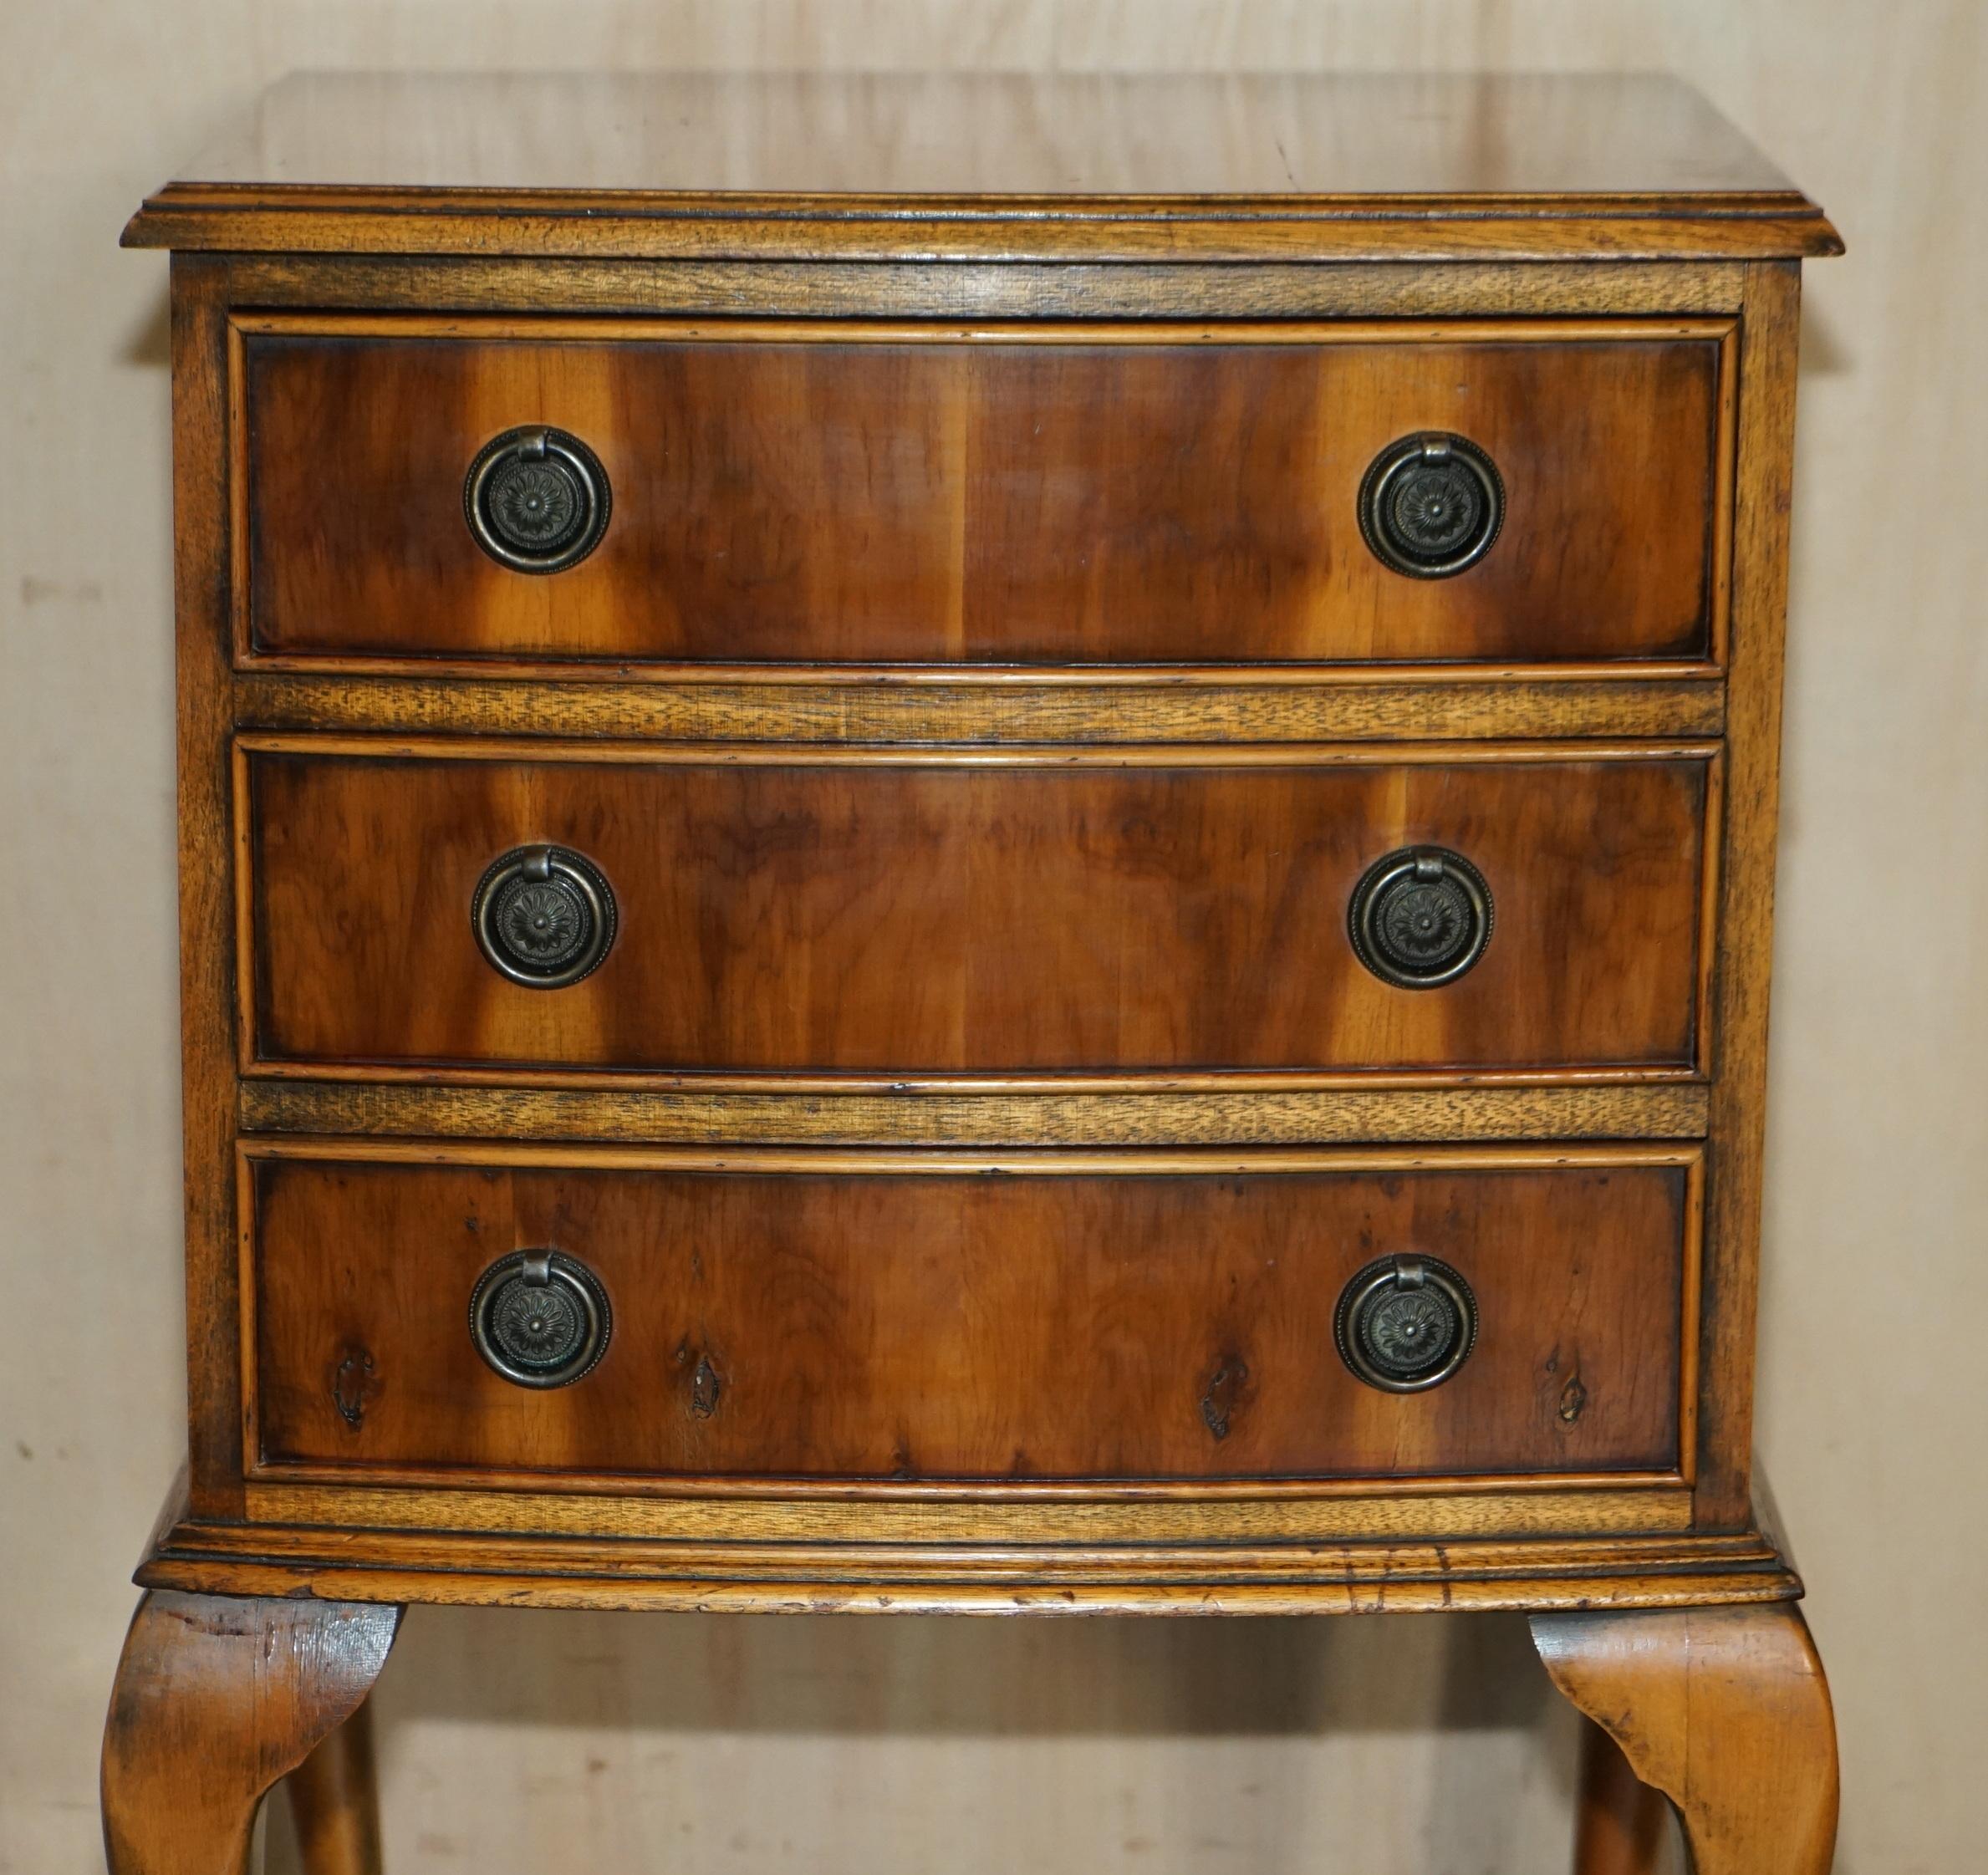 CIRCA 1940''s BURR YEW WOOD BOW FRONTED BEDSIDE SIDE TABLE CHEST OF DRAWERS (Art déco) im Angebot